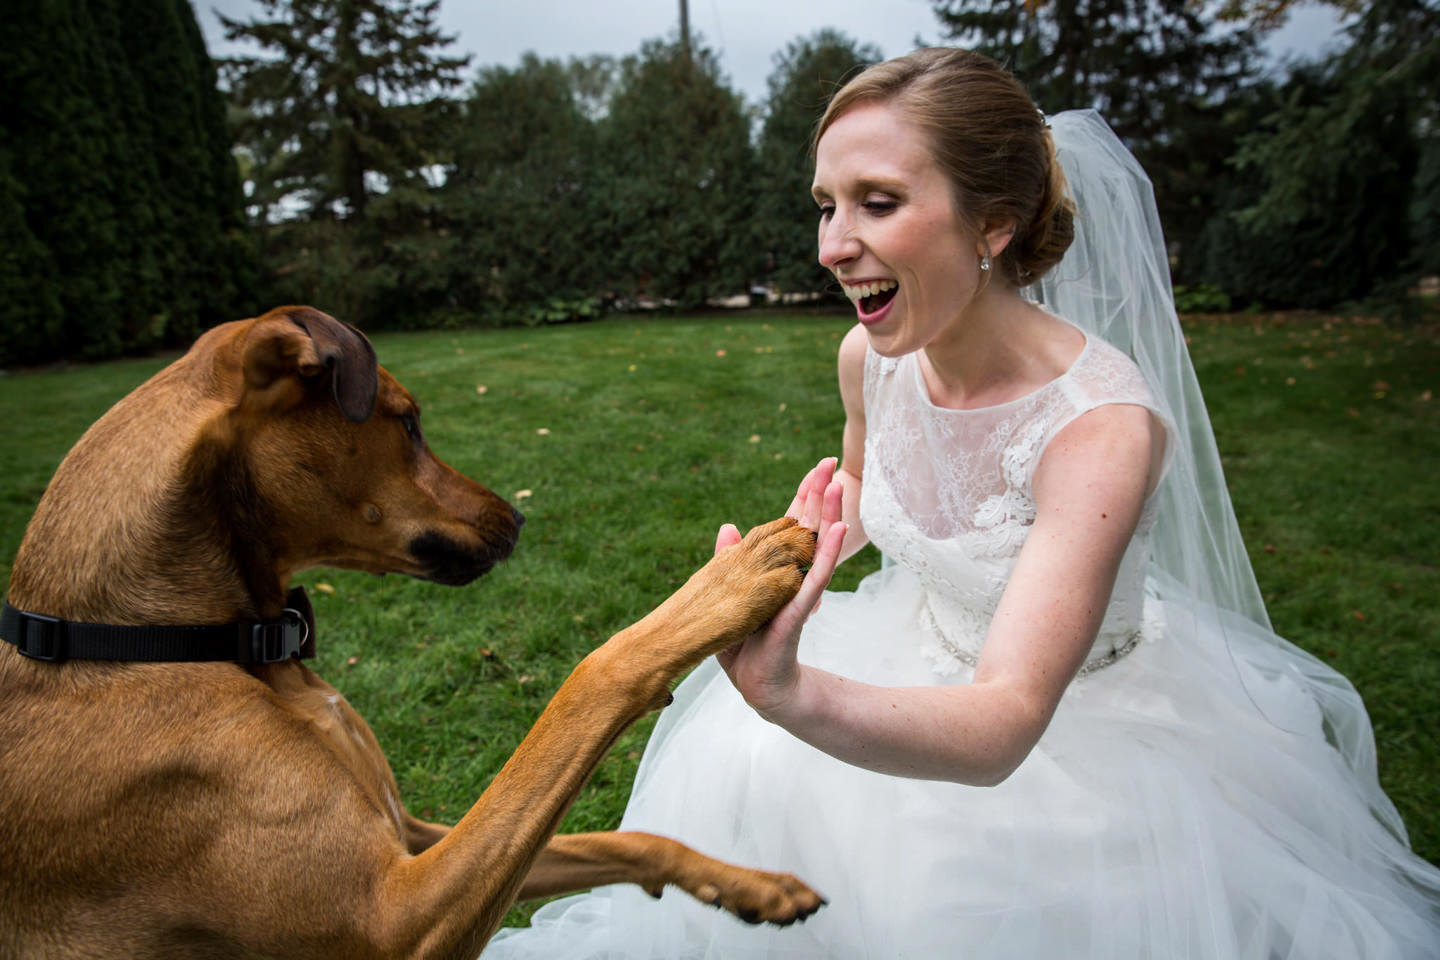 bride and her dog sharing a highfive at wedding